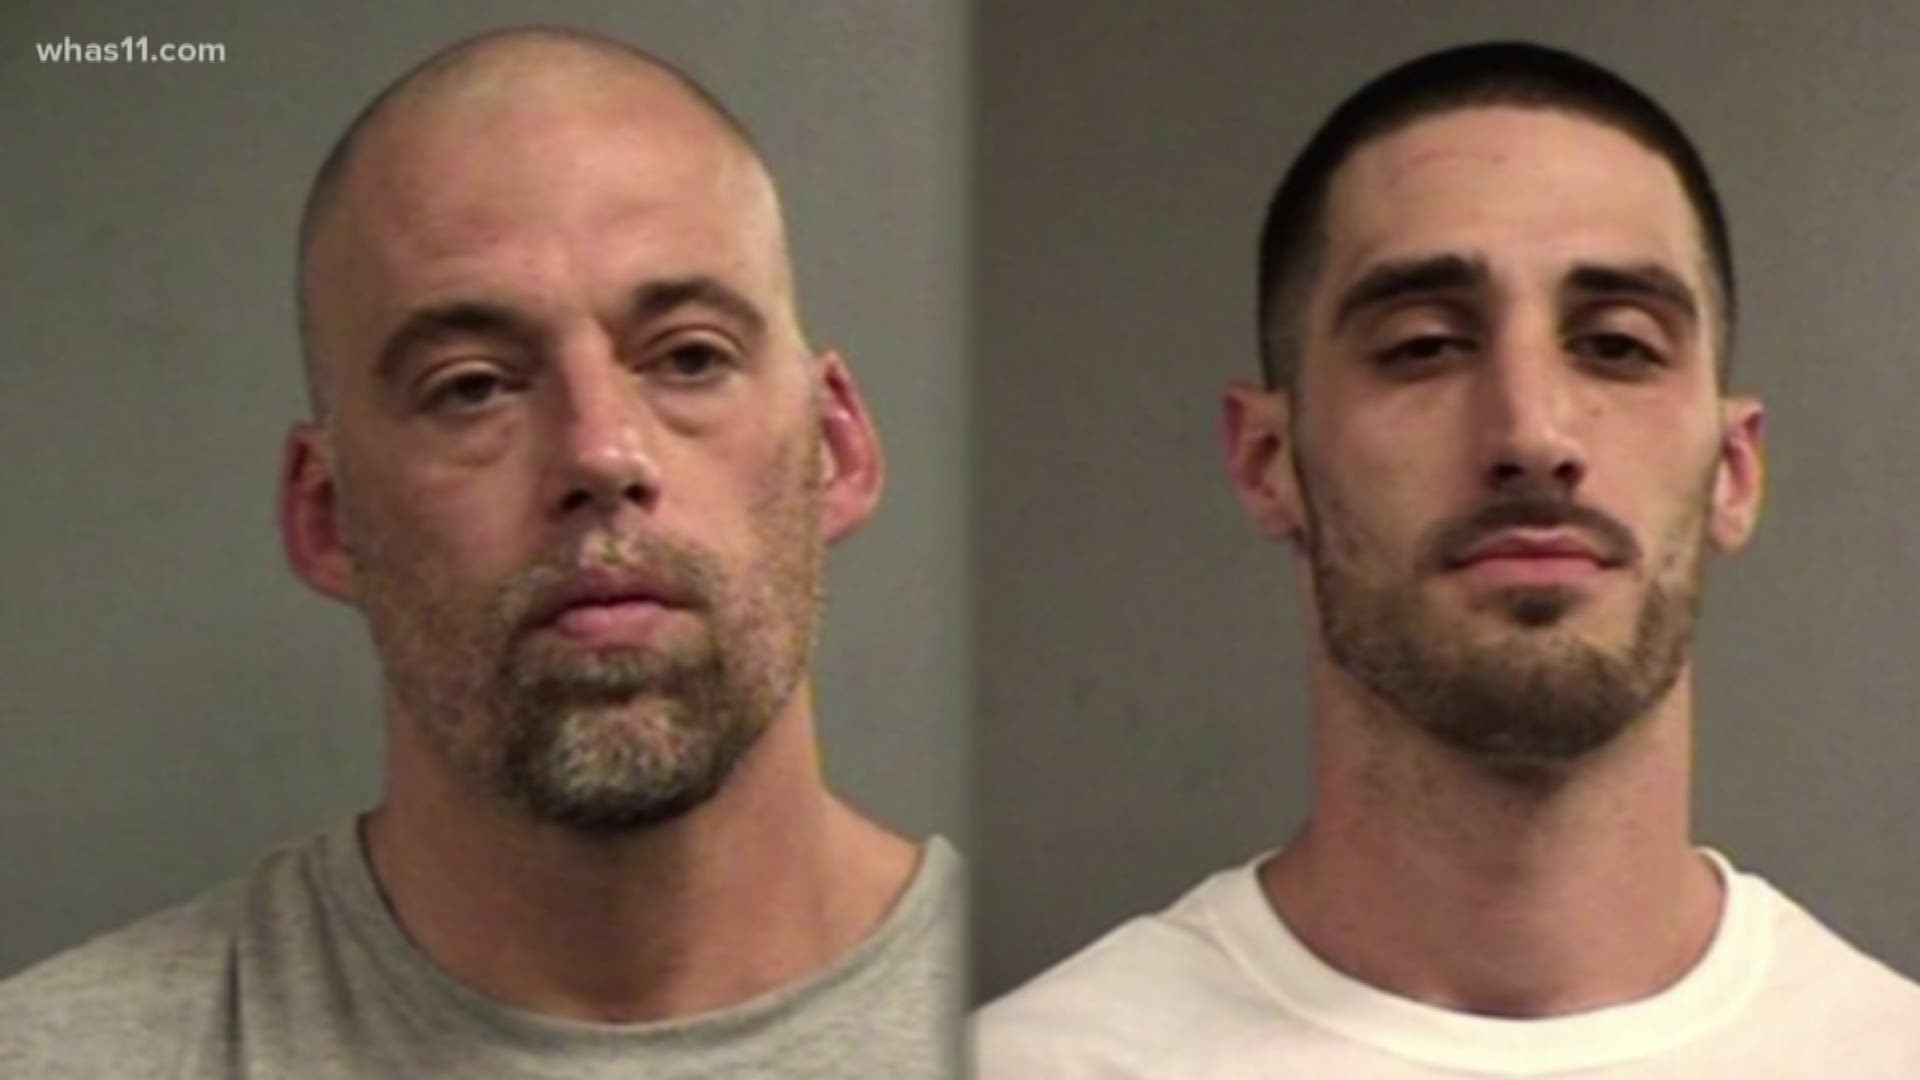 Louisville Metro Corrections says two men hid in trash cans in order to escape the facility Saturday night.